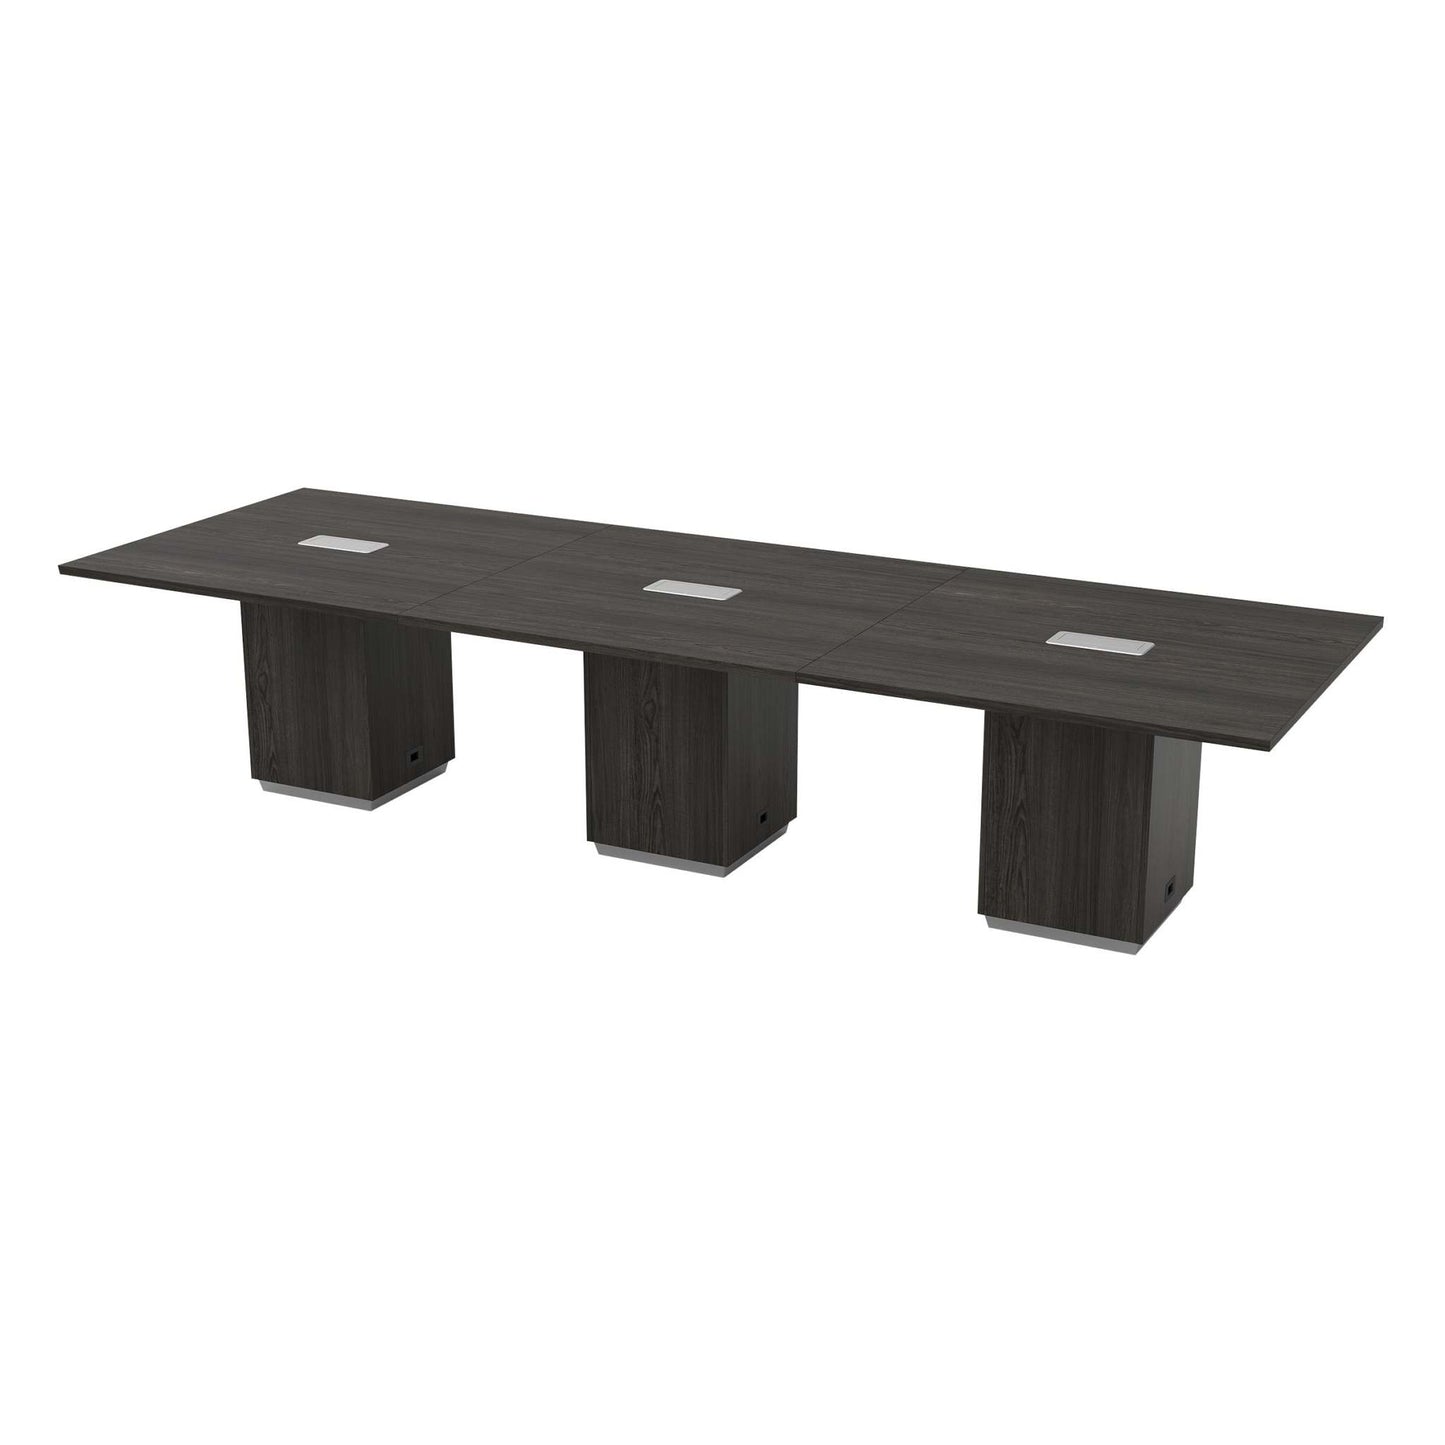 New Tuxedo Series 12′ Rectangular Conference Table by Office Star